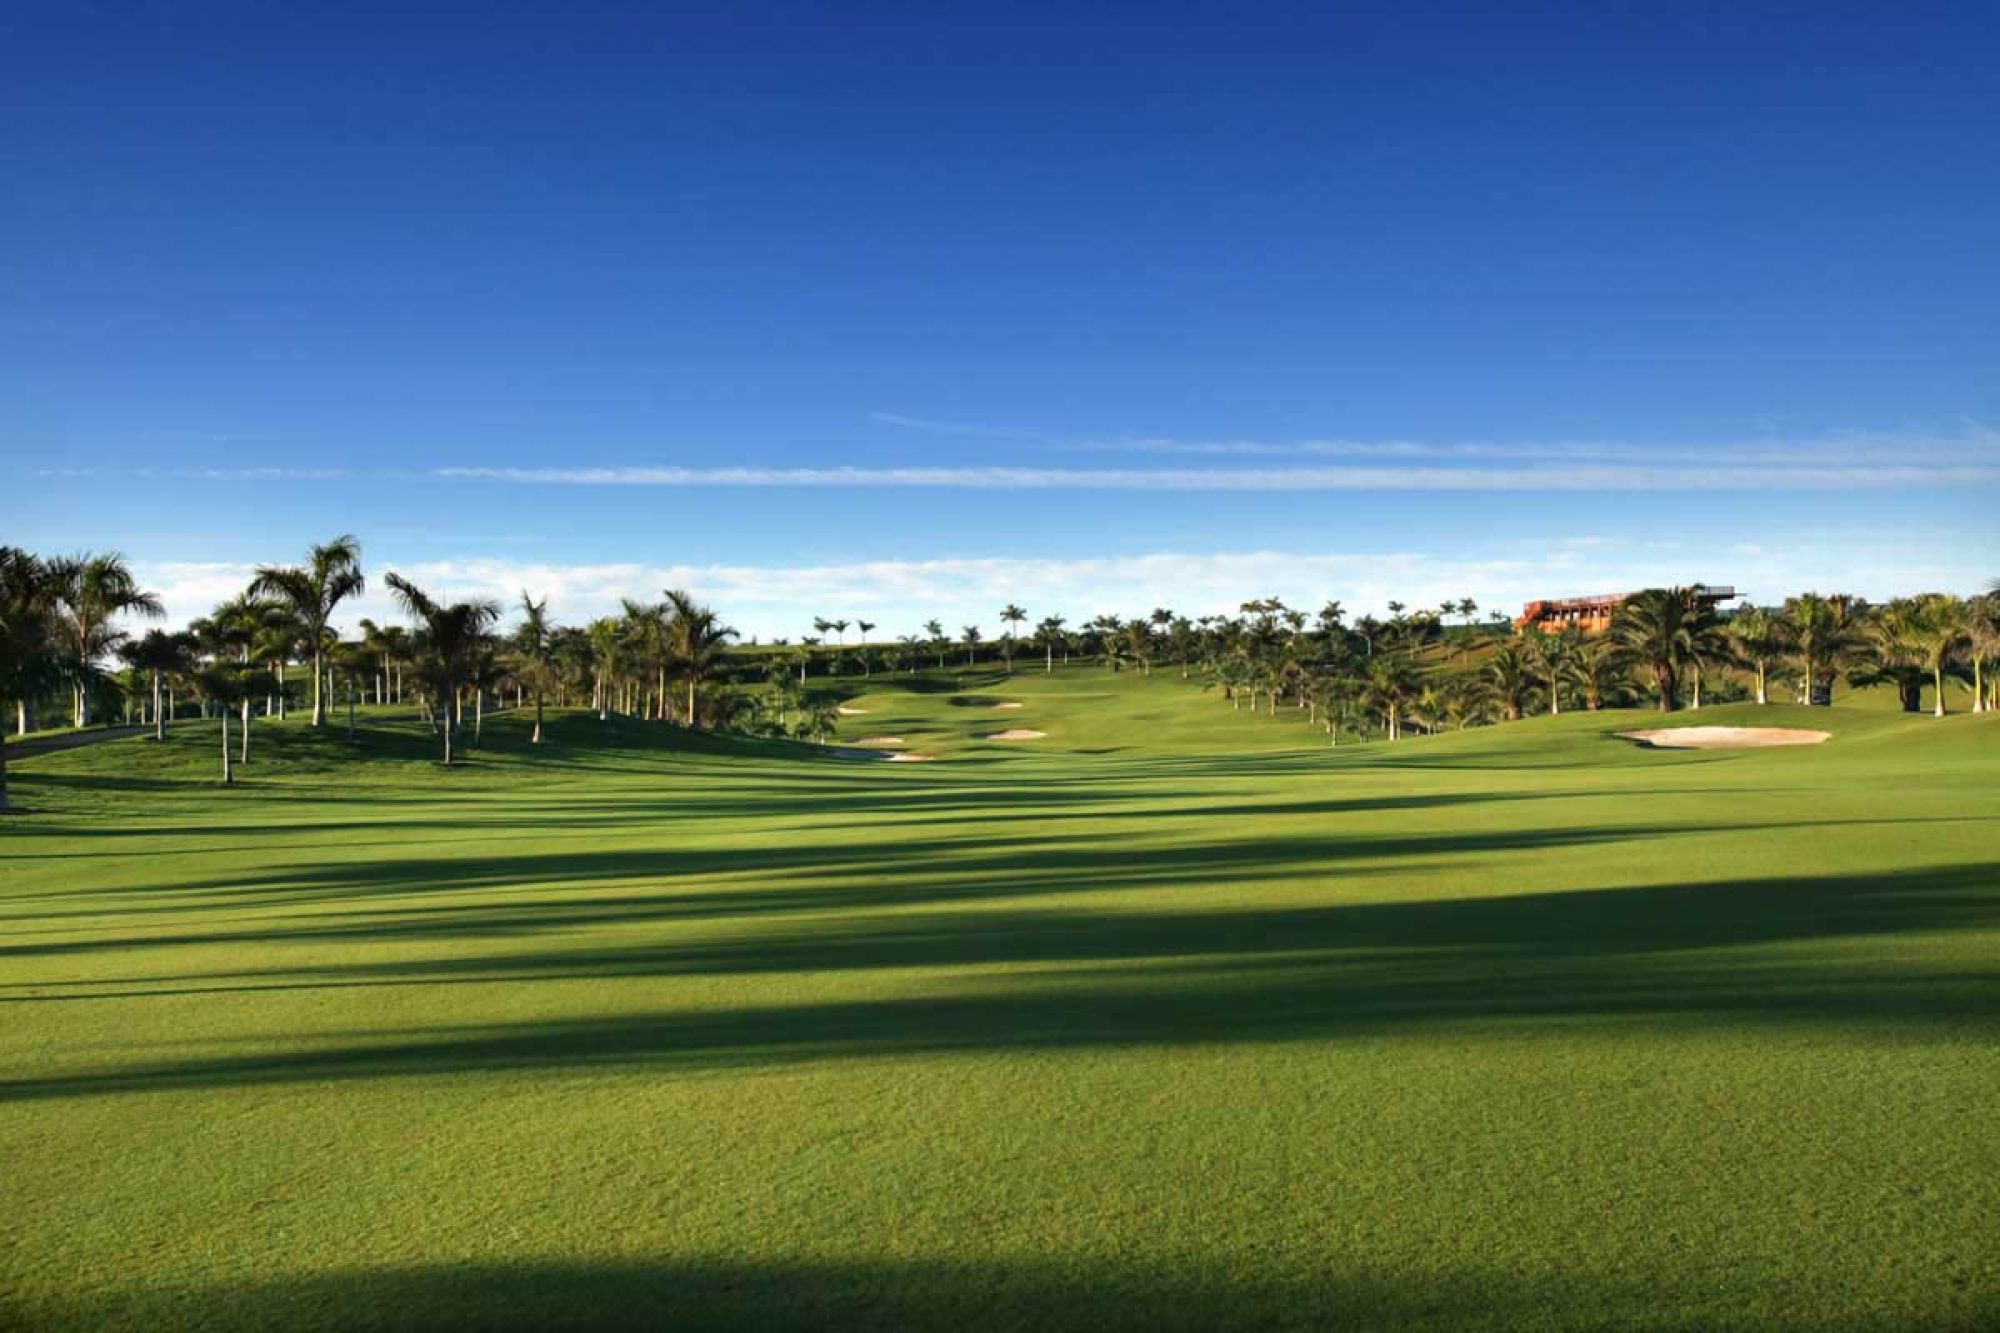 Meloneras Golf Course offers among the most popular golf course within Gran Canaria